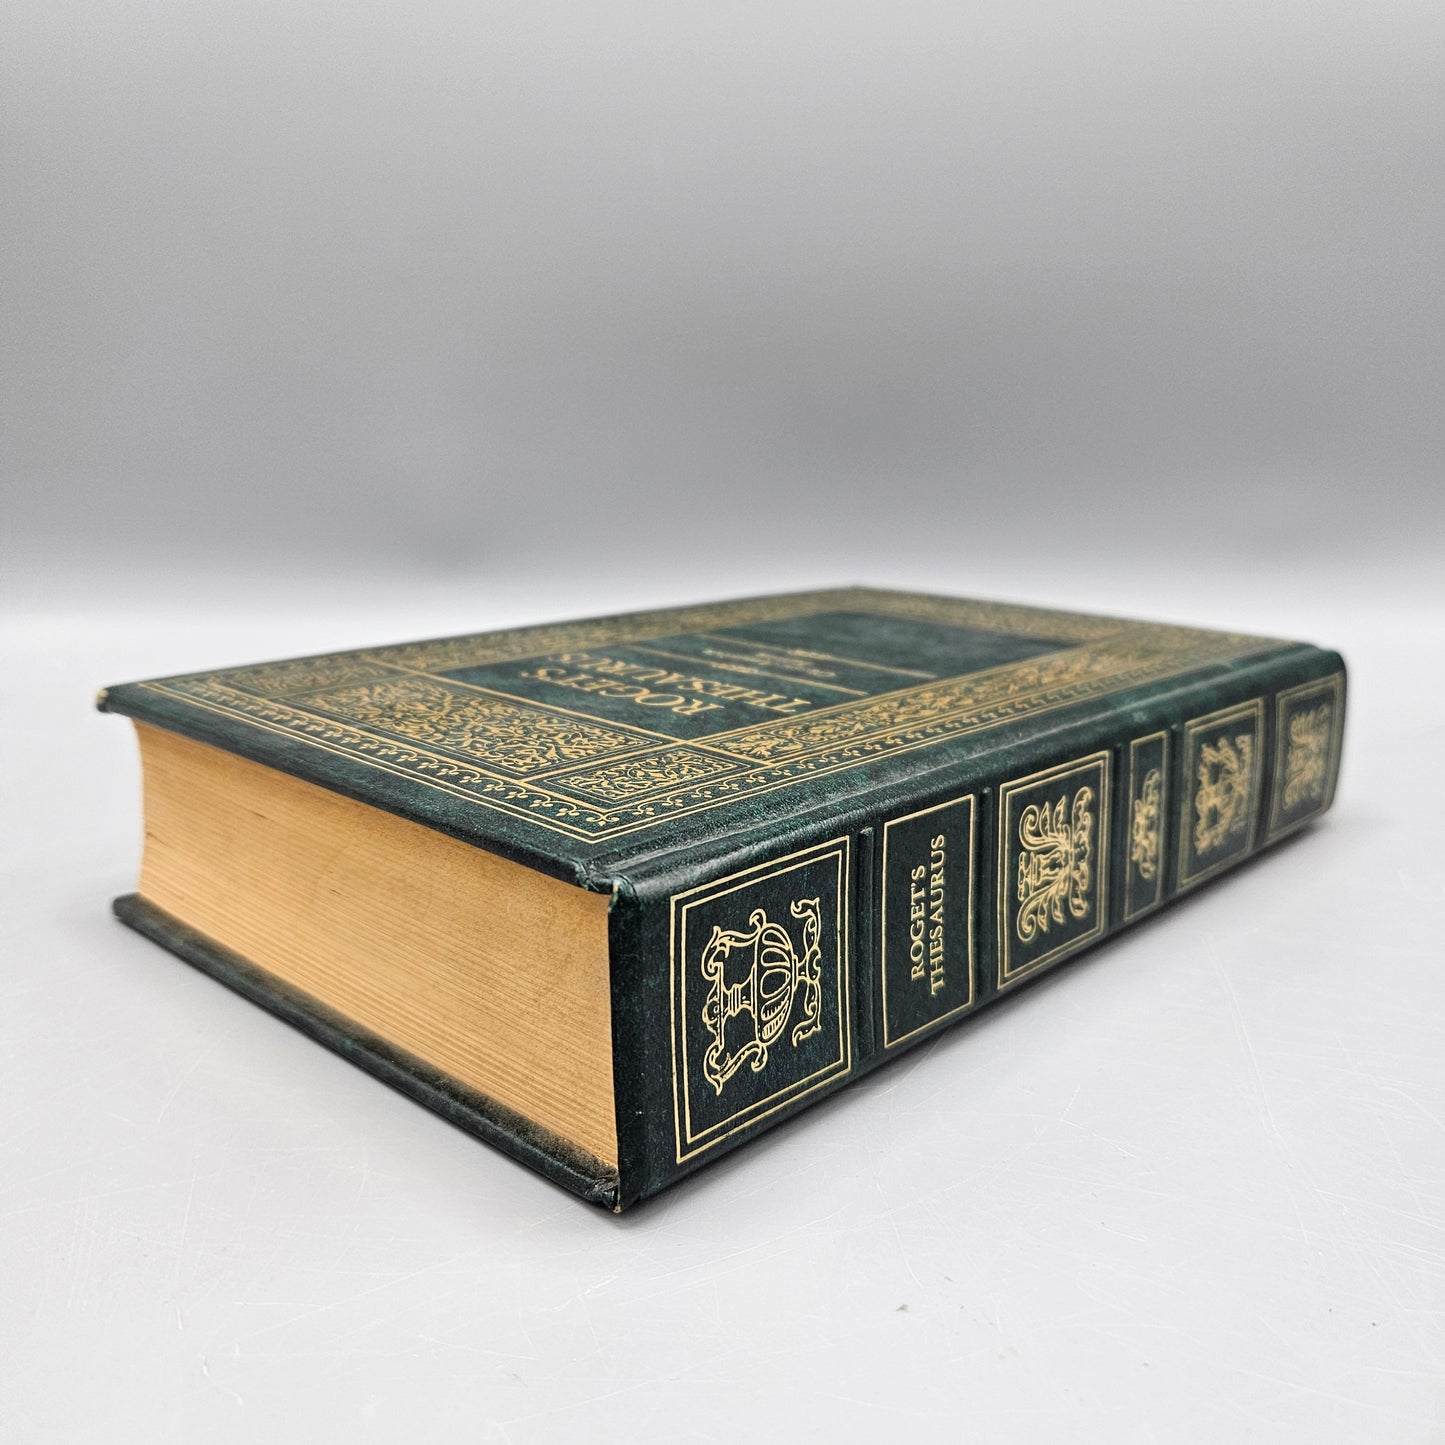 Leatherbound Book - Roget's Thesaurus Of English Words and Phrases - Avenel Books